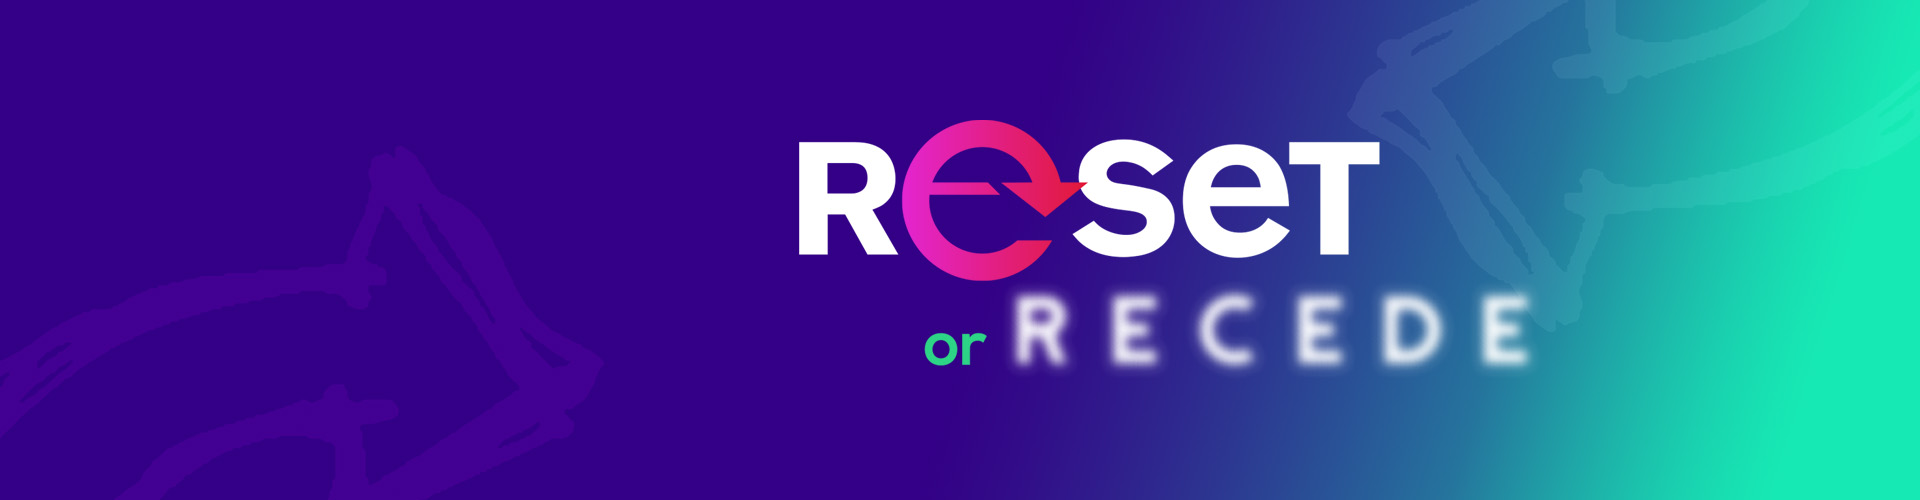 Future Shop® 2021-23: Reset or Recede Report Banner featuring blue to green gradient with title graphic